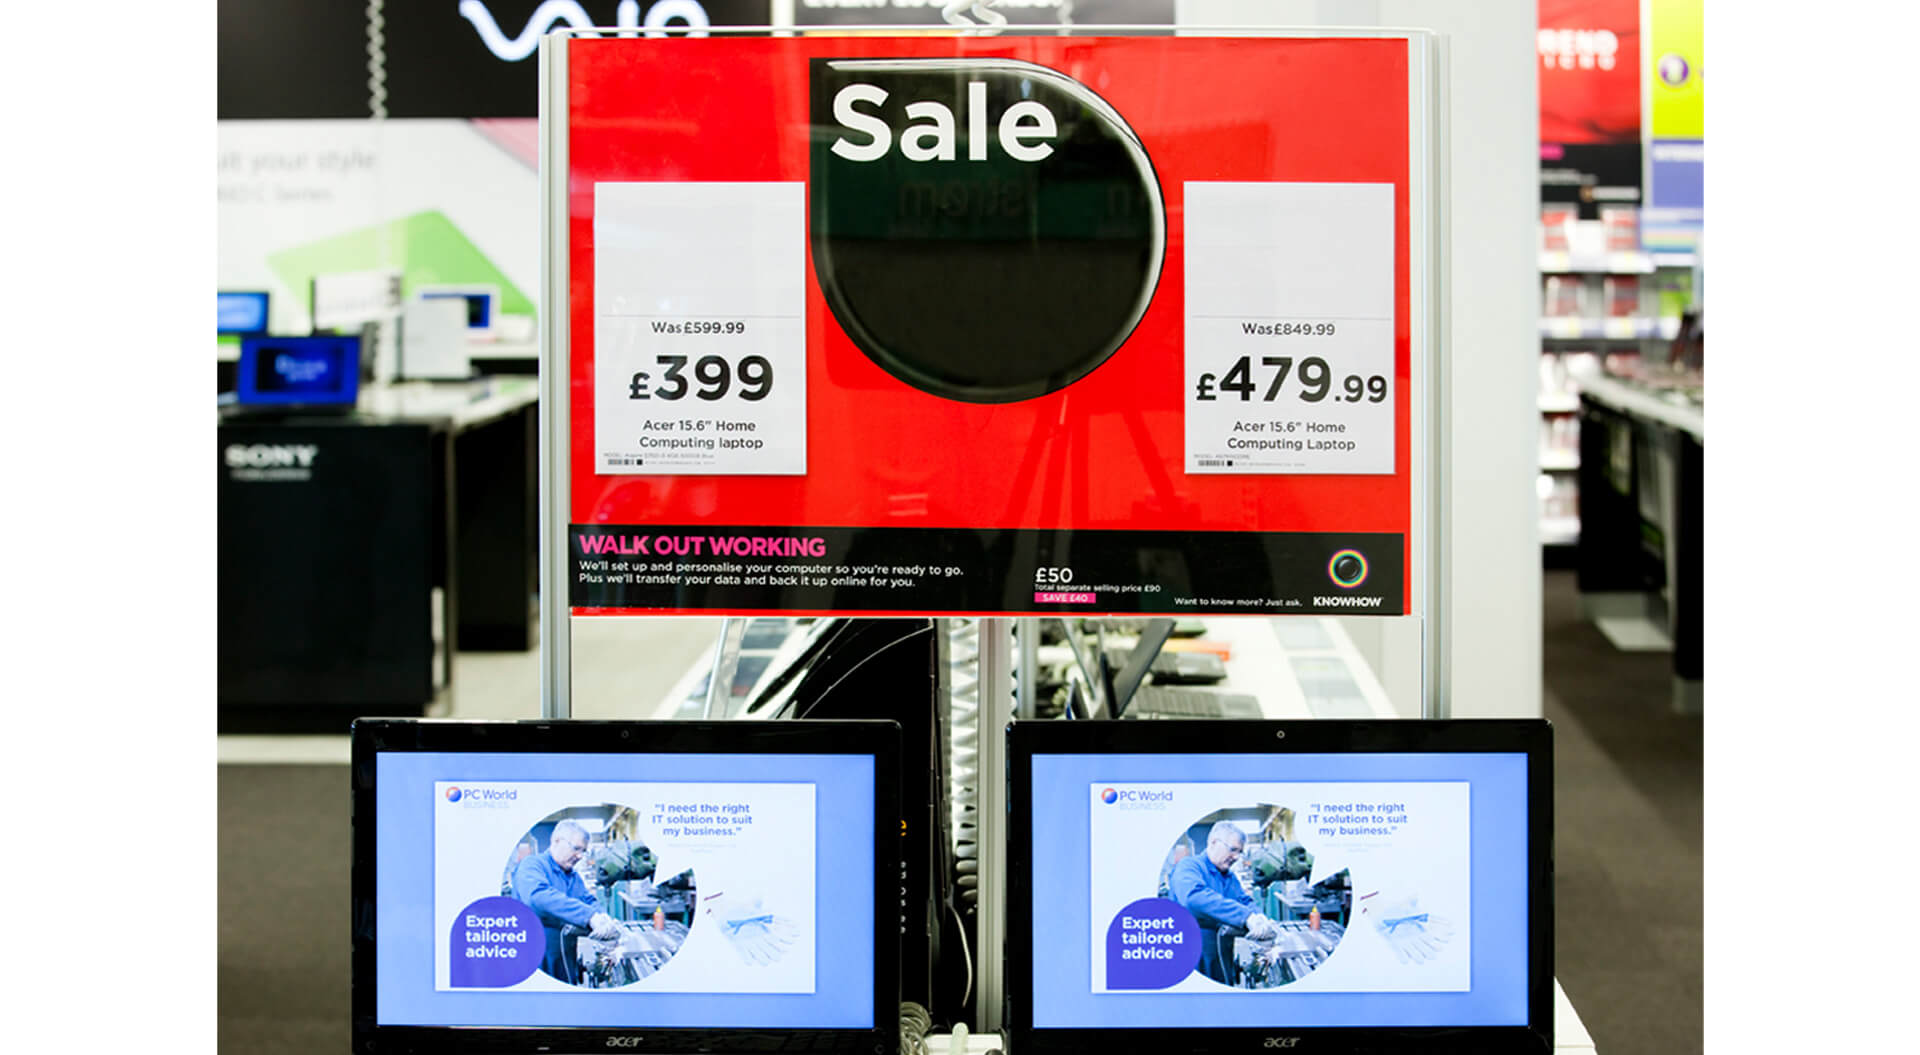 Currys PC World corporate in-store brand sales communications